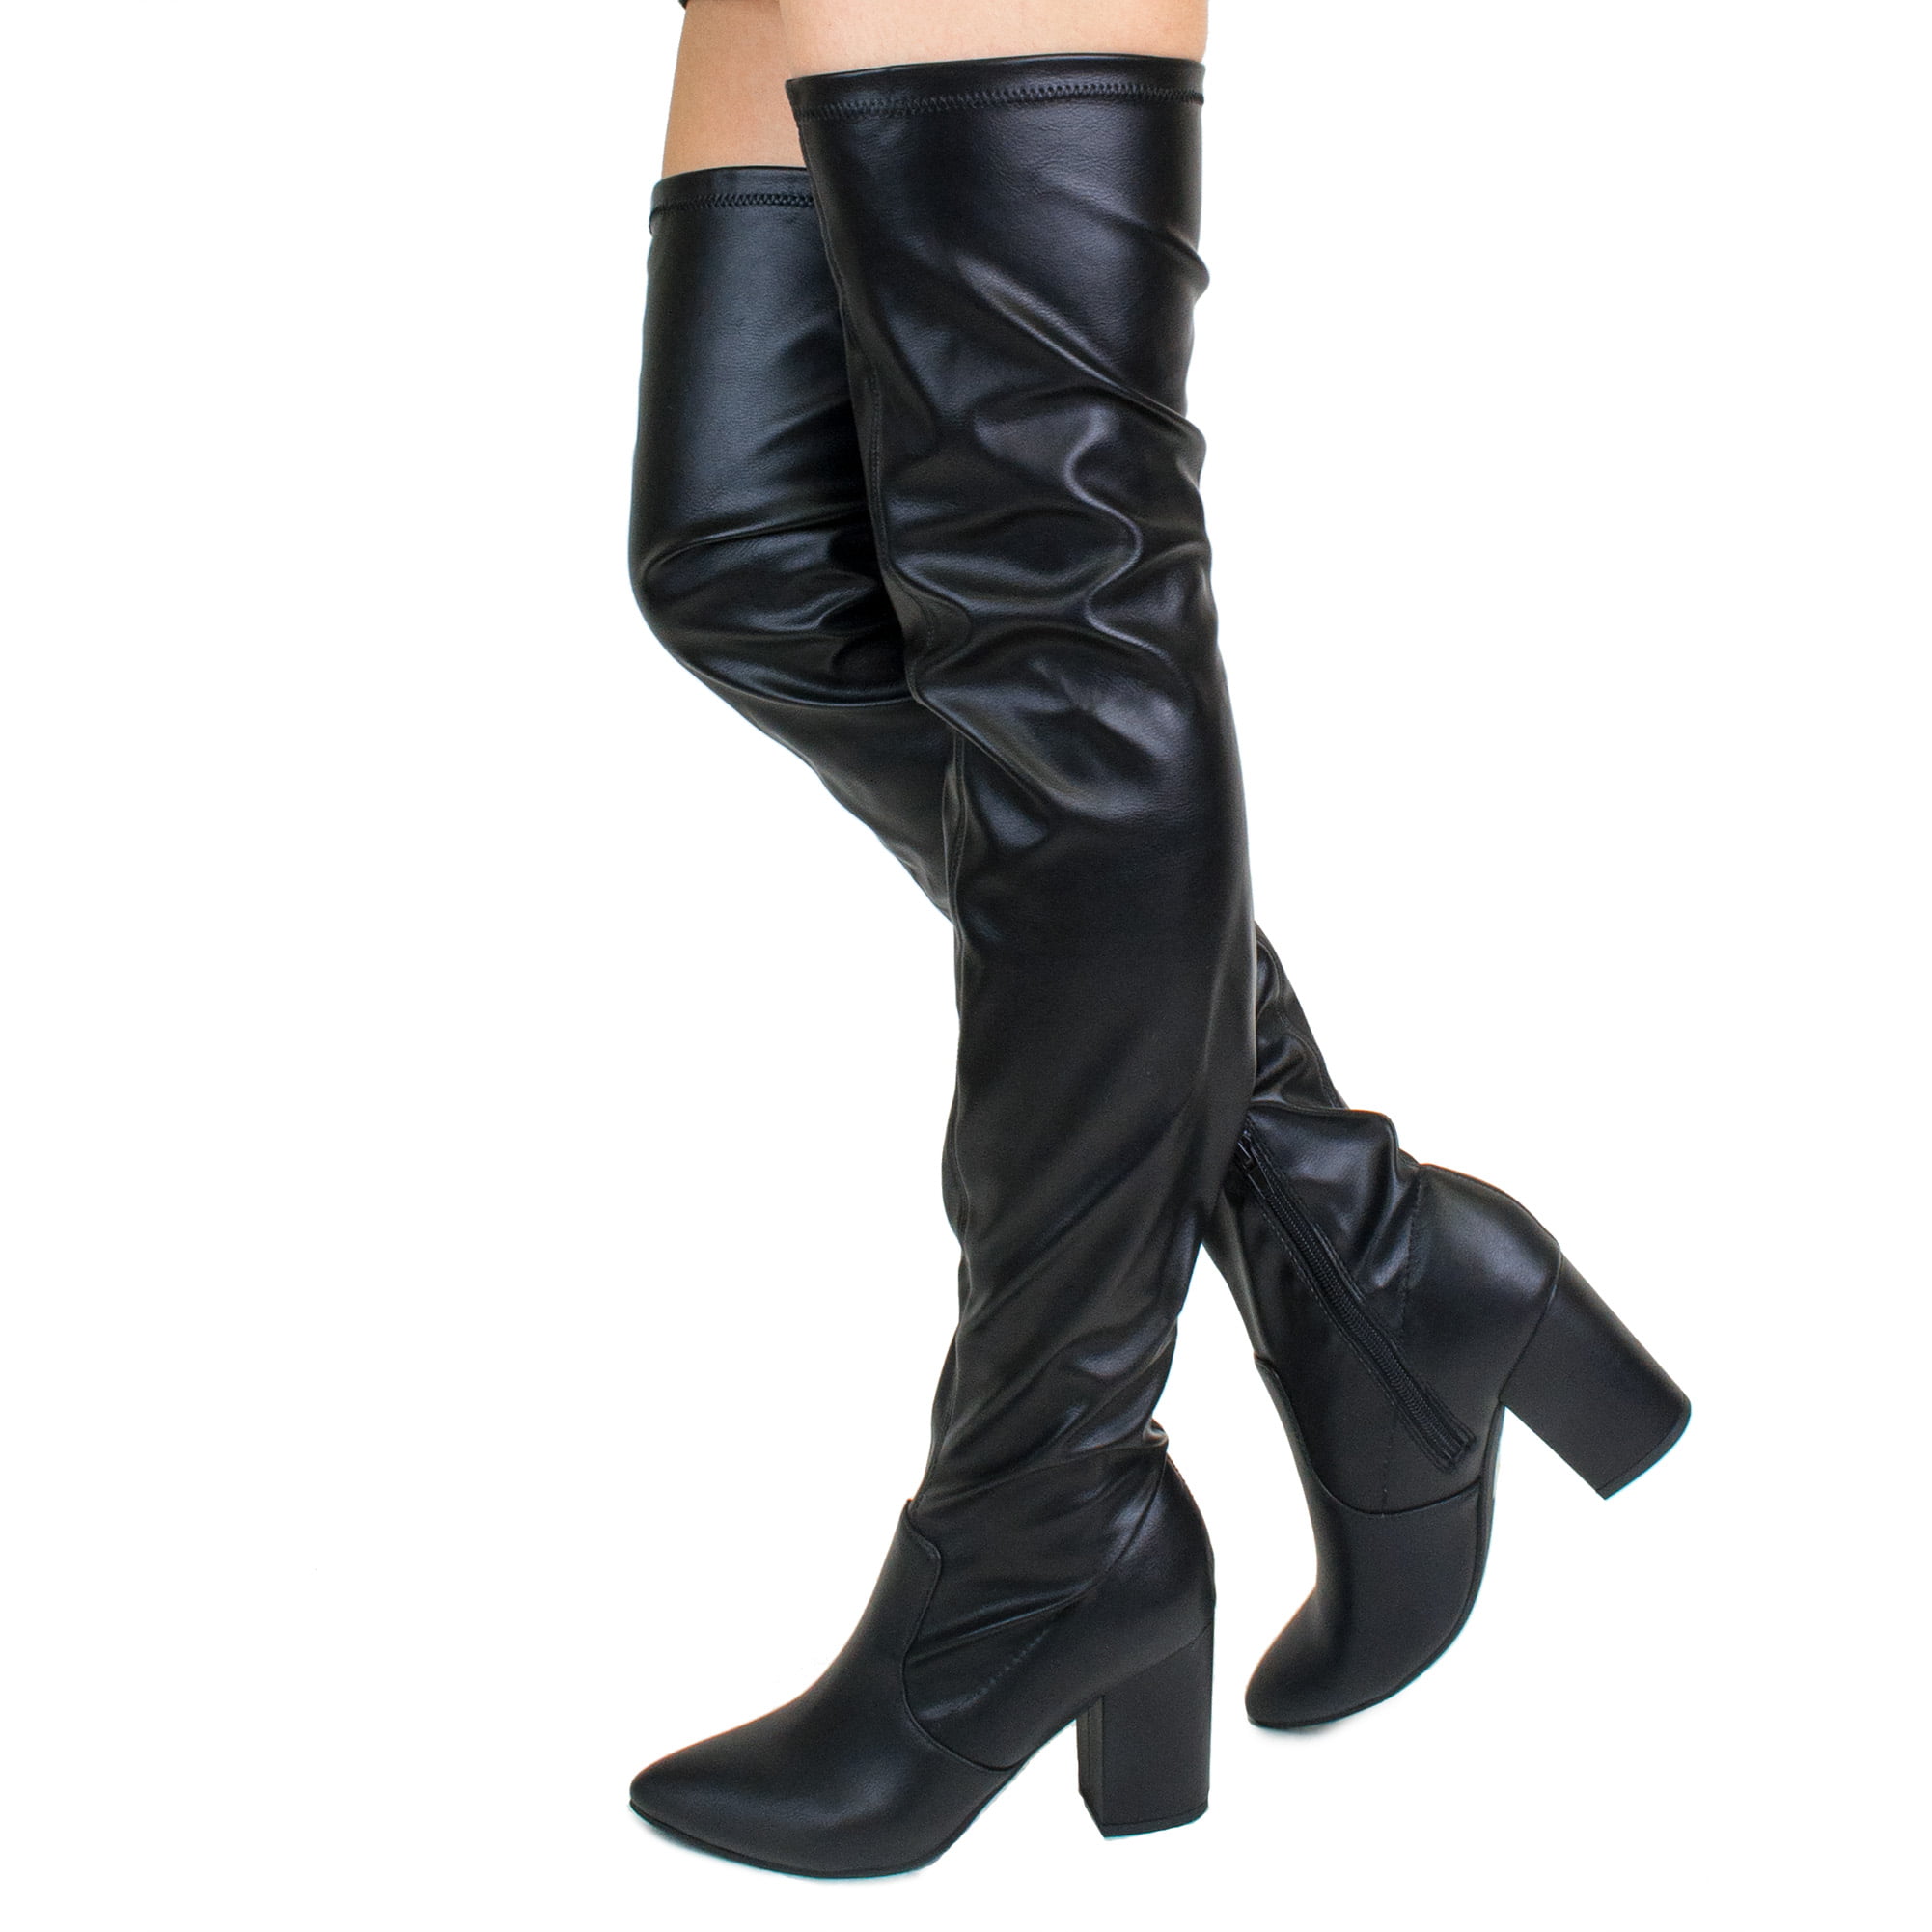 Women Thigh High Faux Suede Winter Stretch Over The Knee Boots Zip High Heel Pointed Toe Boots